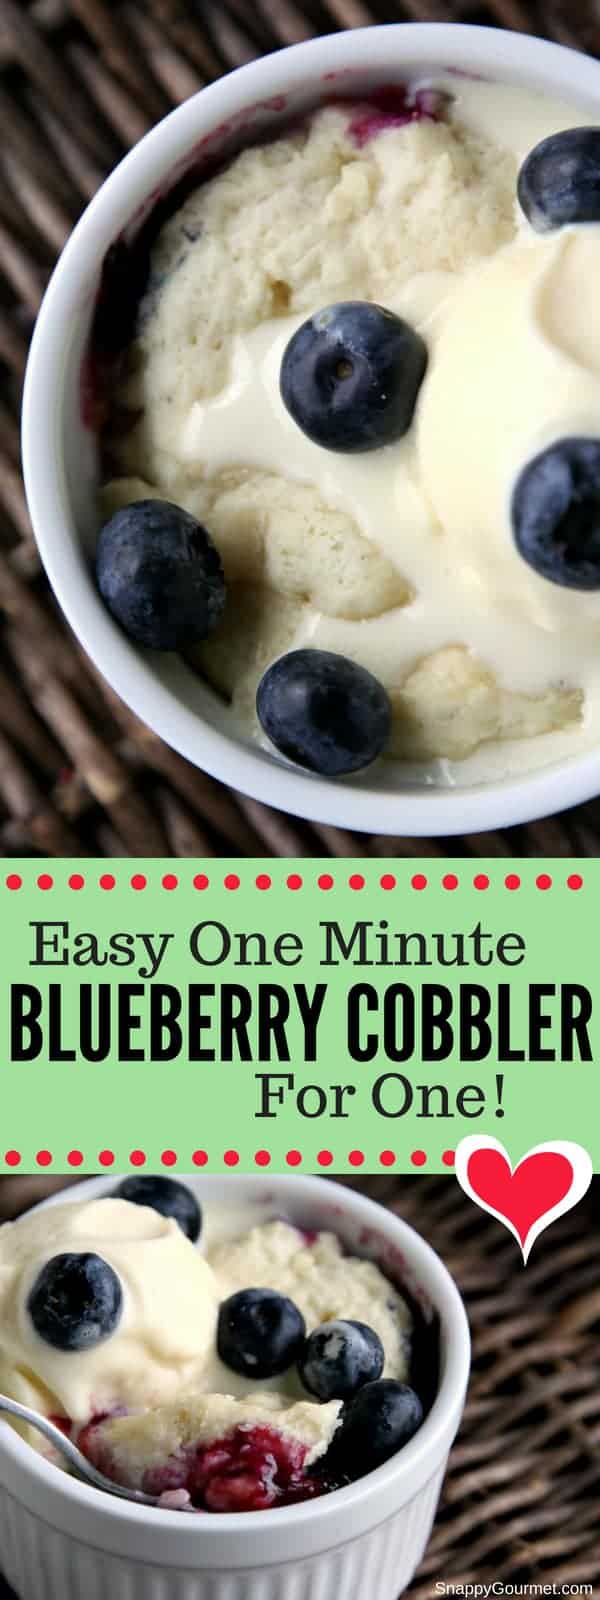 Easy Blueberry Cobbler Recipe - dessert for one ready in one minute